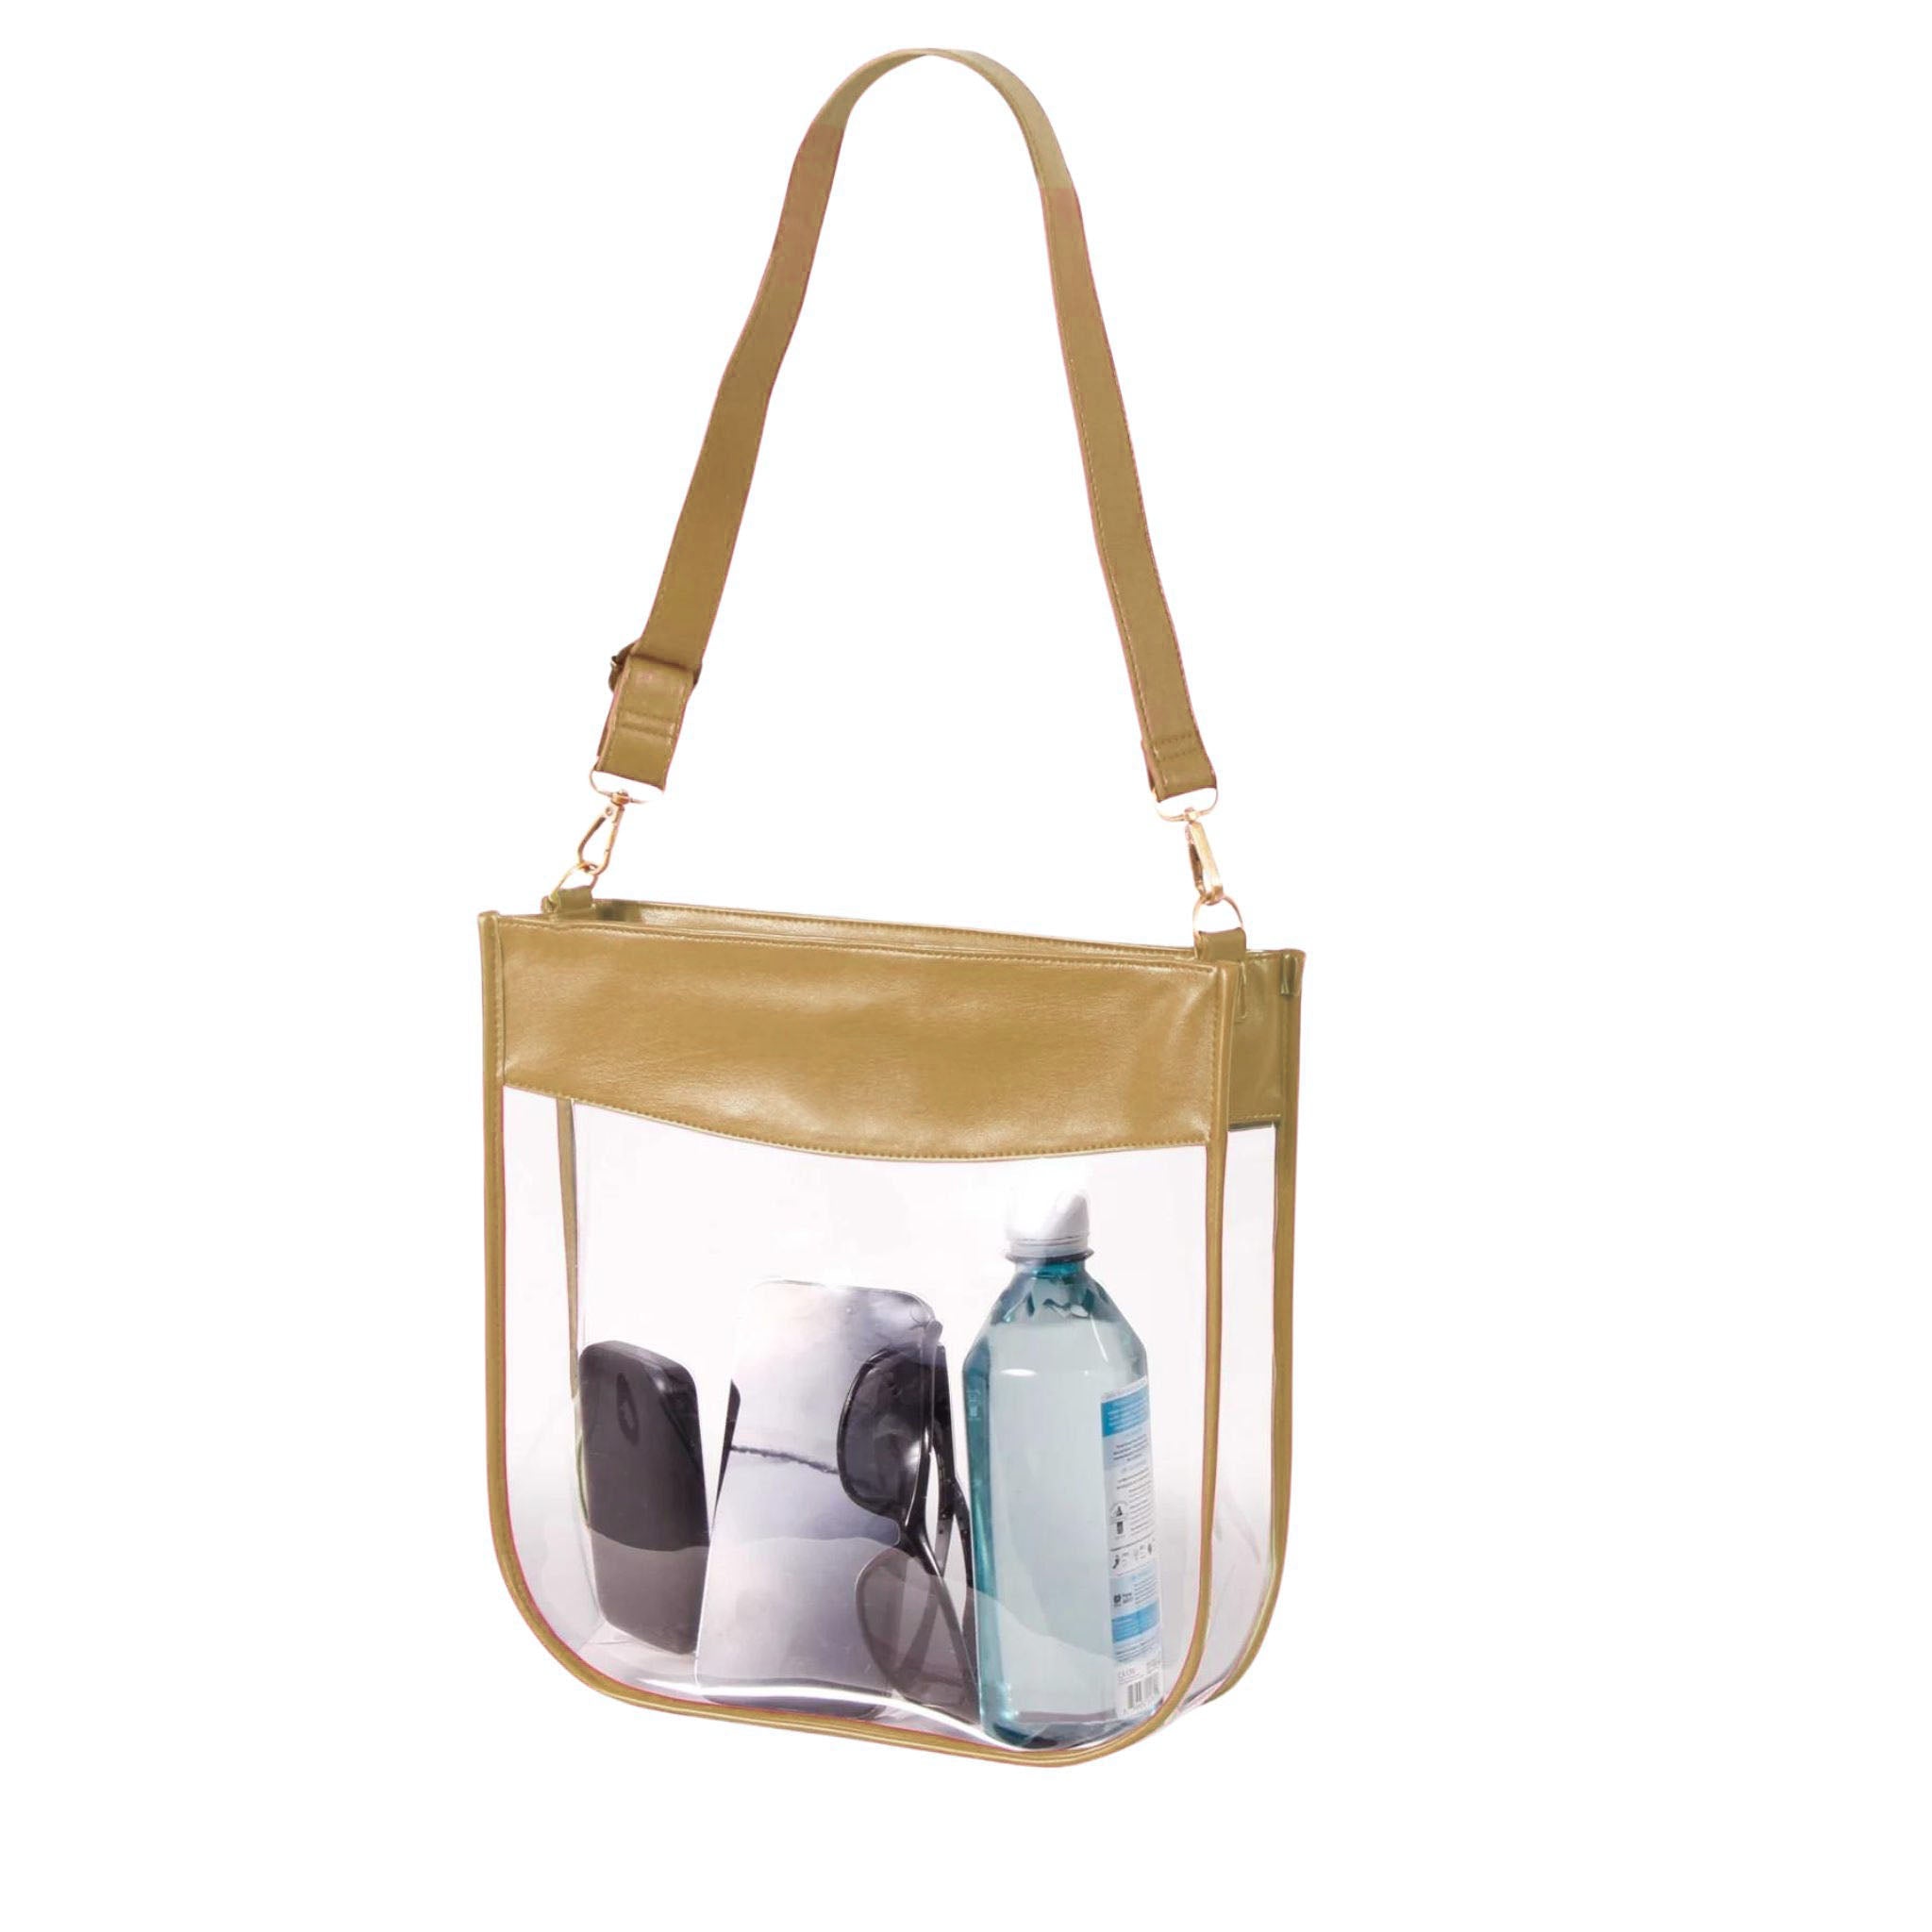 Stadium Approved Clear Messenger - Gold Trim